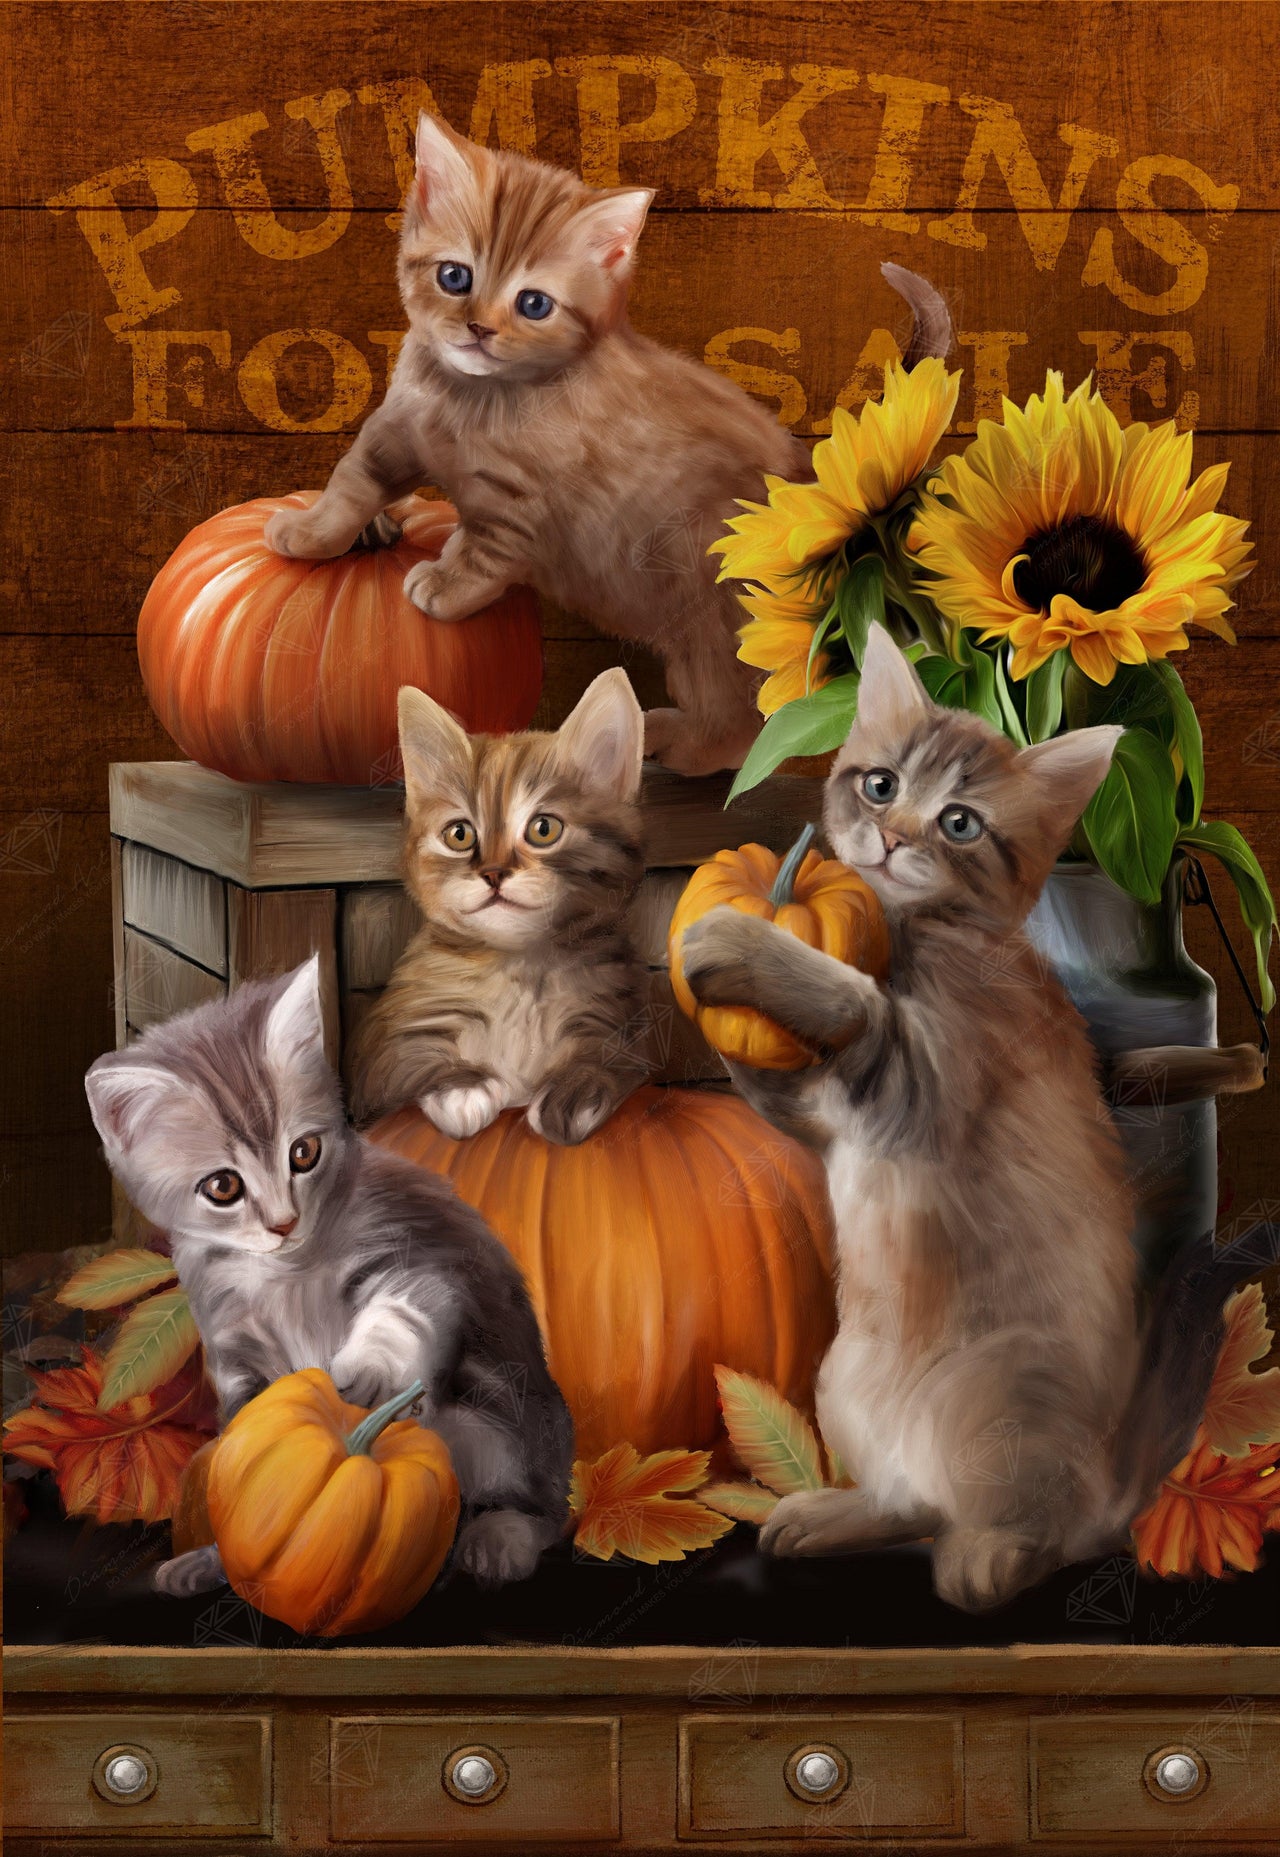 Diamond Painting Autumn Kittens 22" x 32" (55.8cm x 80.9cm) / Square With 55 Colors Including 4 ABs / 72,800